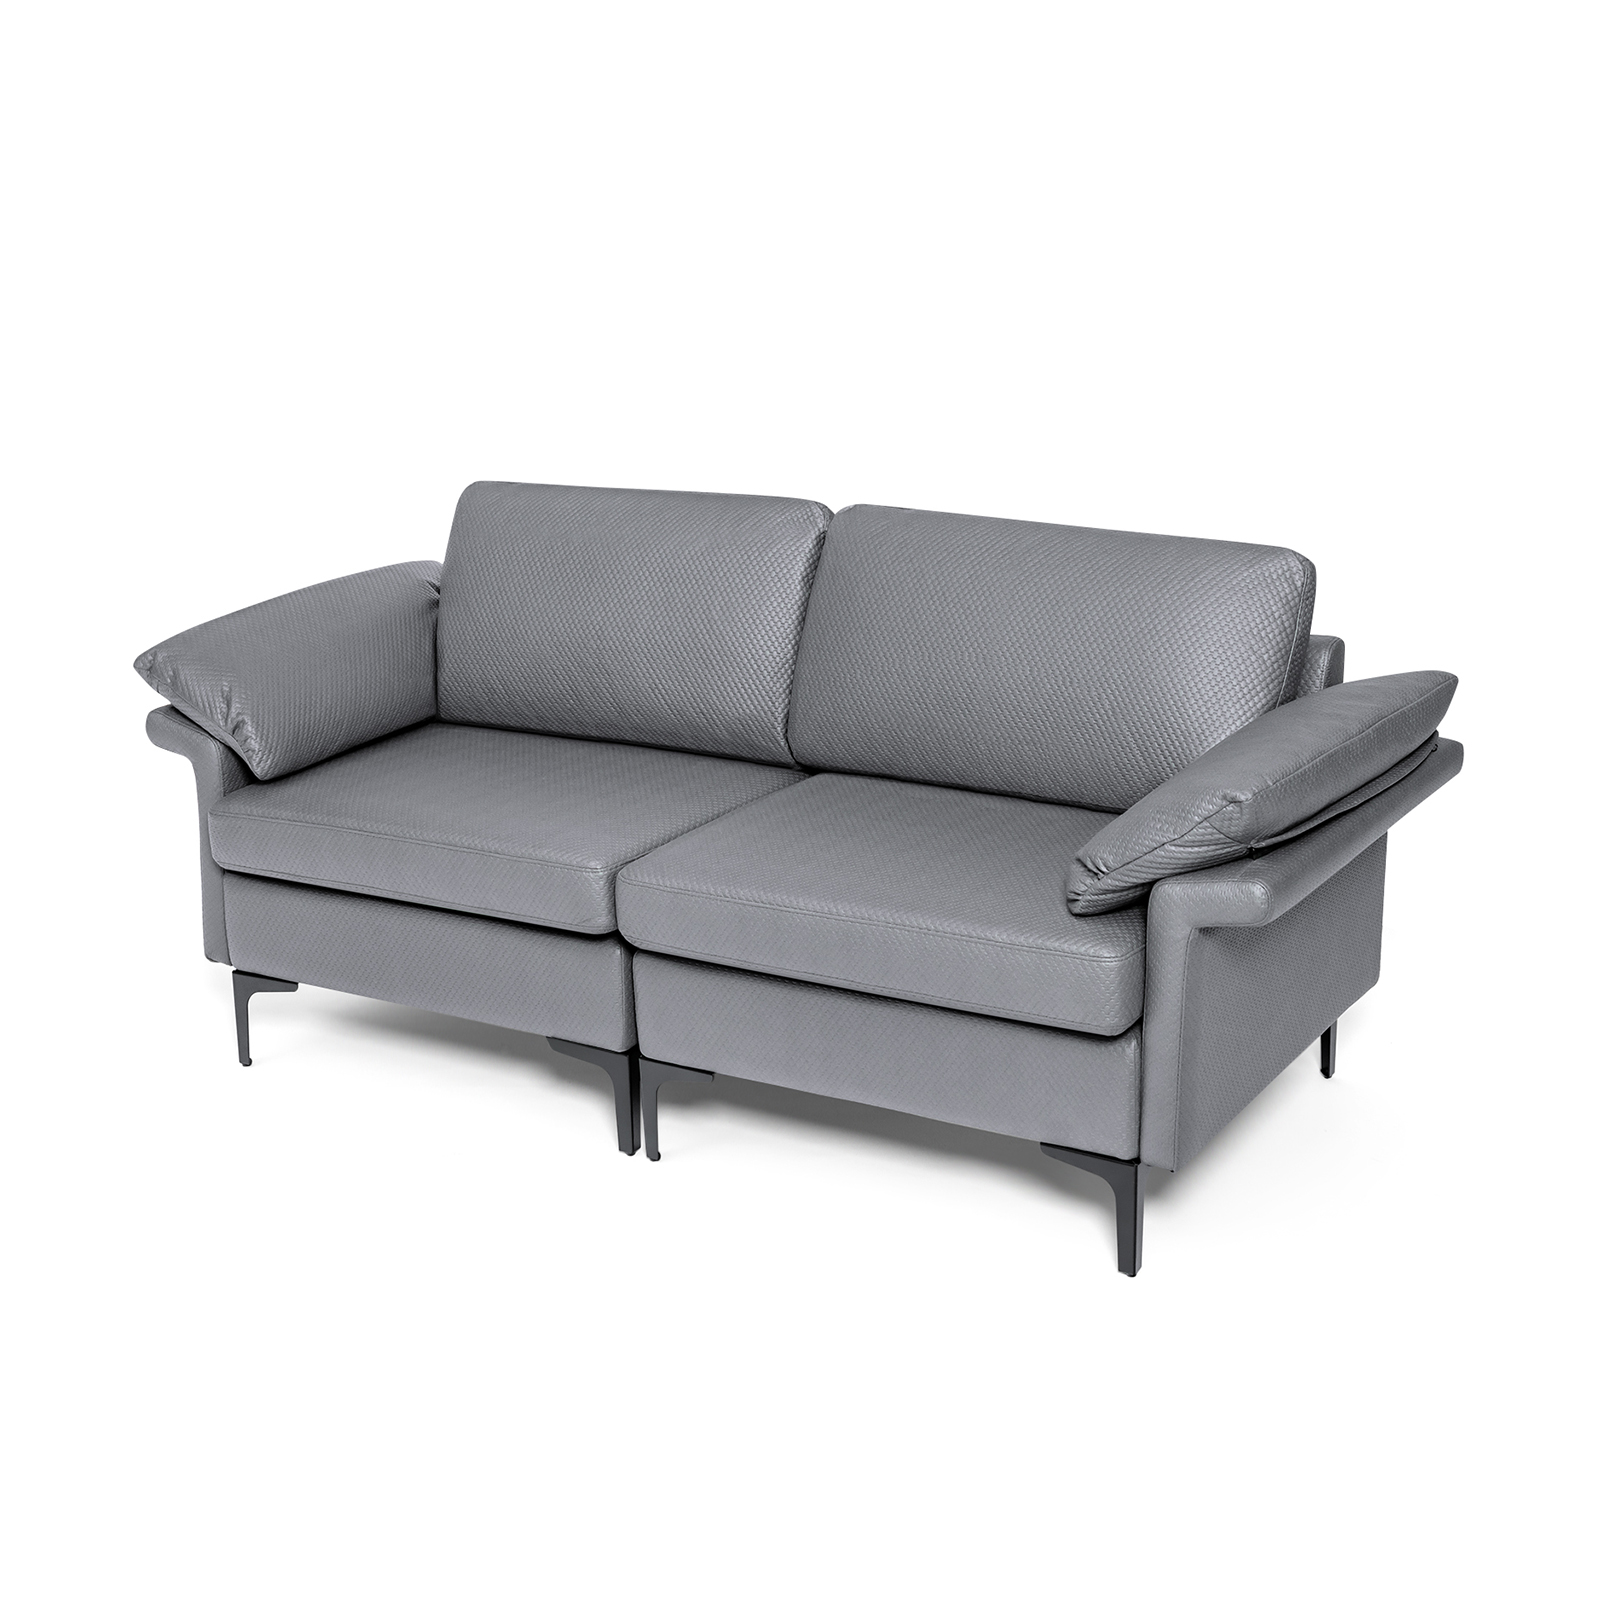 L-Shaped 2-Seater Upholstered Sectional Couch-Grey